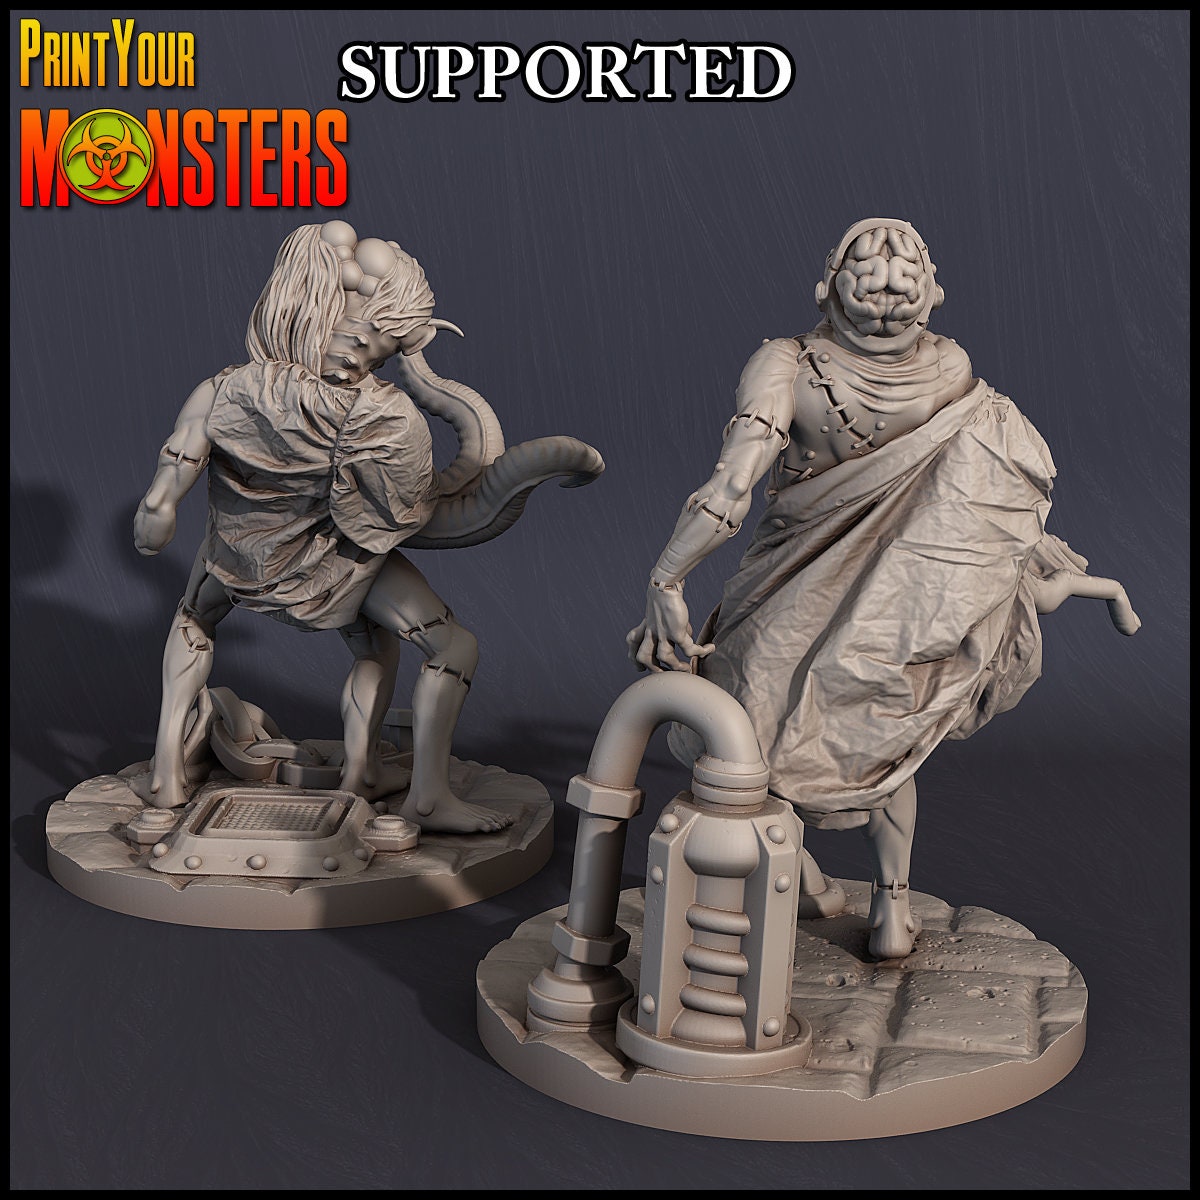 Organic Patients - Print Your Monsters 